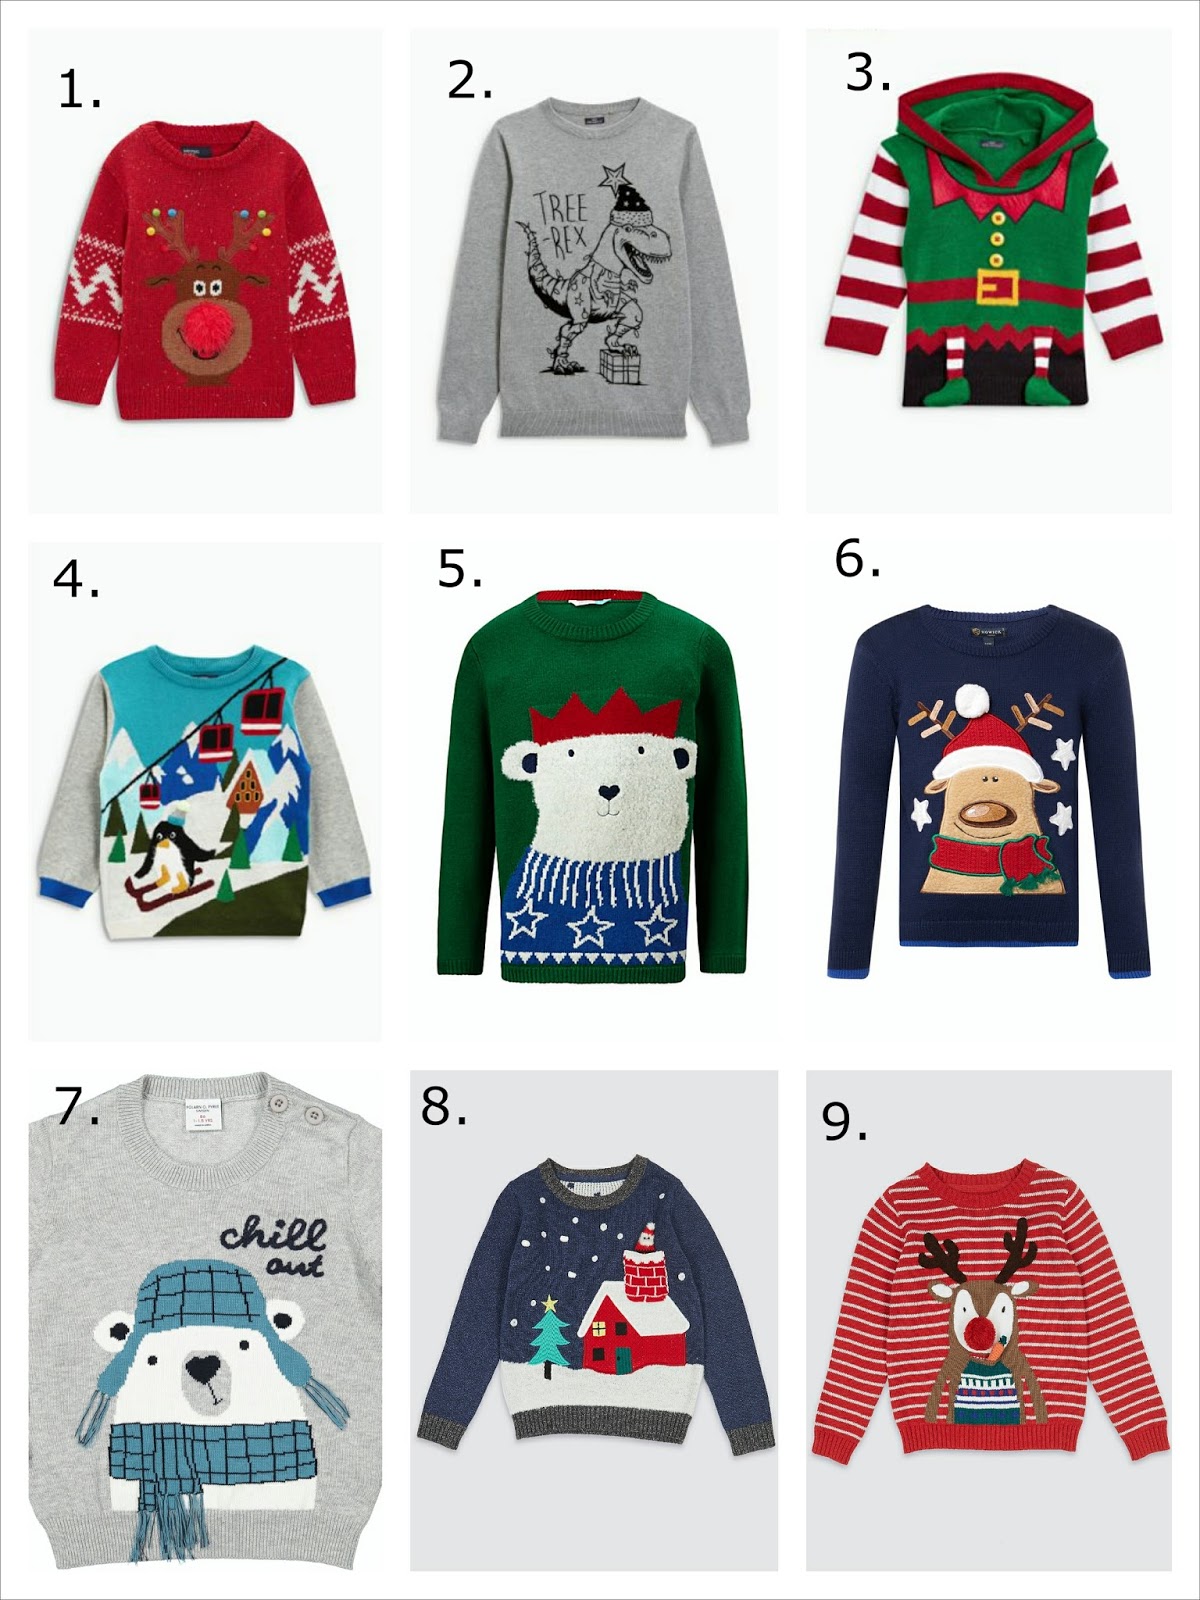 Christmas Jumper For 2 Year Old Boy Christmas Images 2021